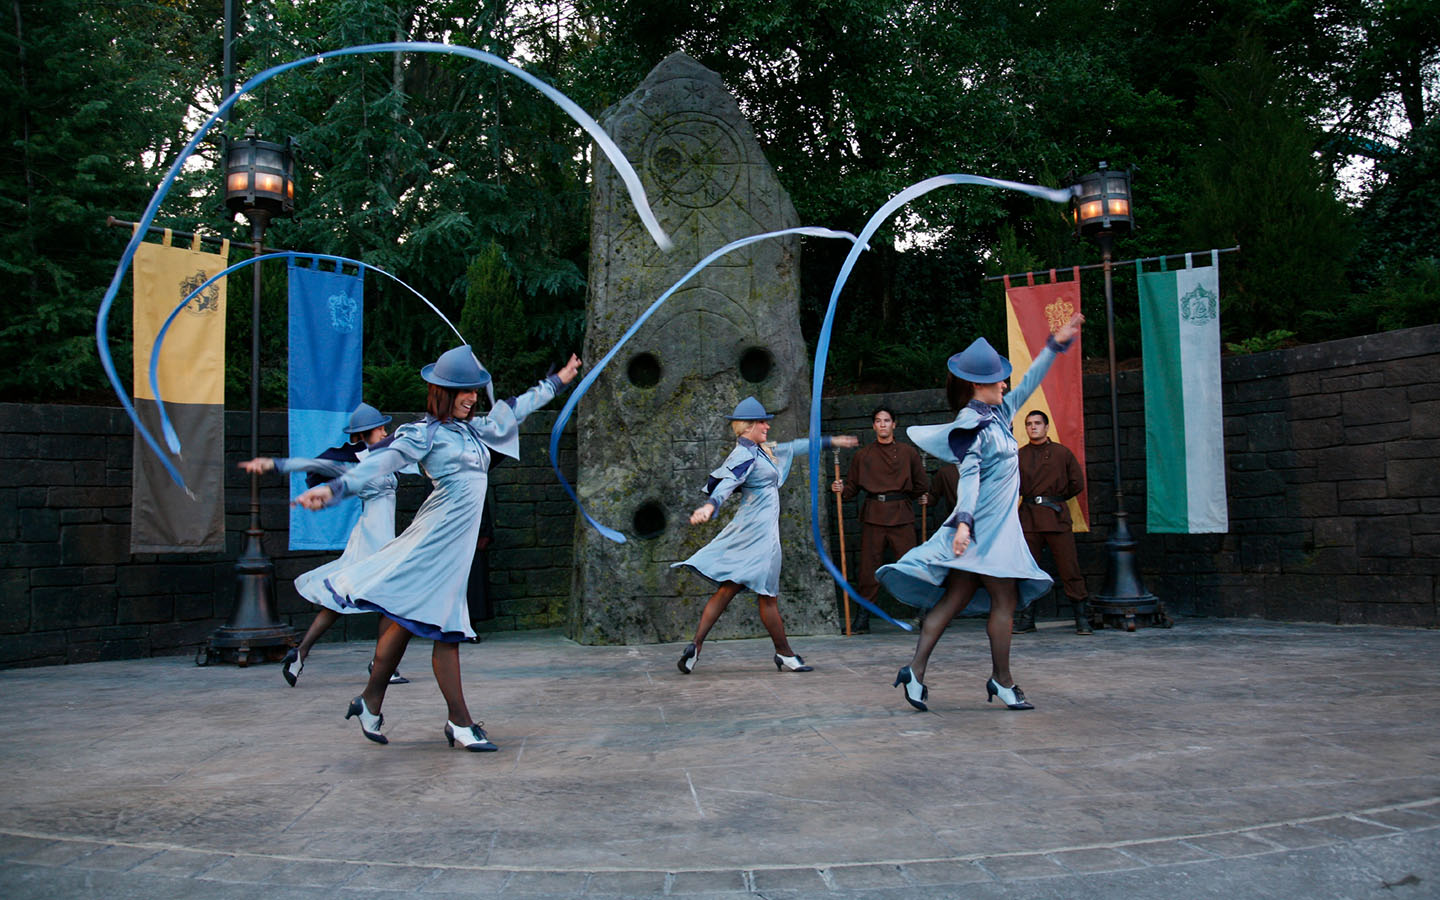 Triwizard Spirit Rally in The Wizarding World of Harry Potter